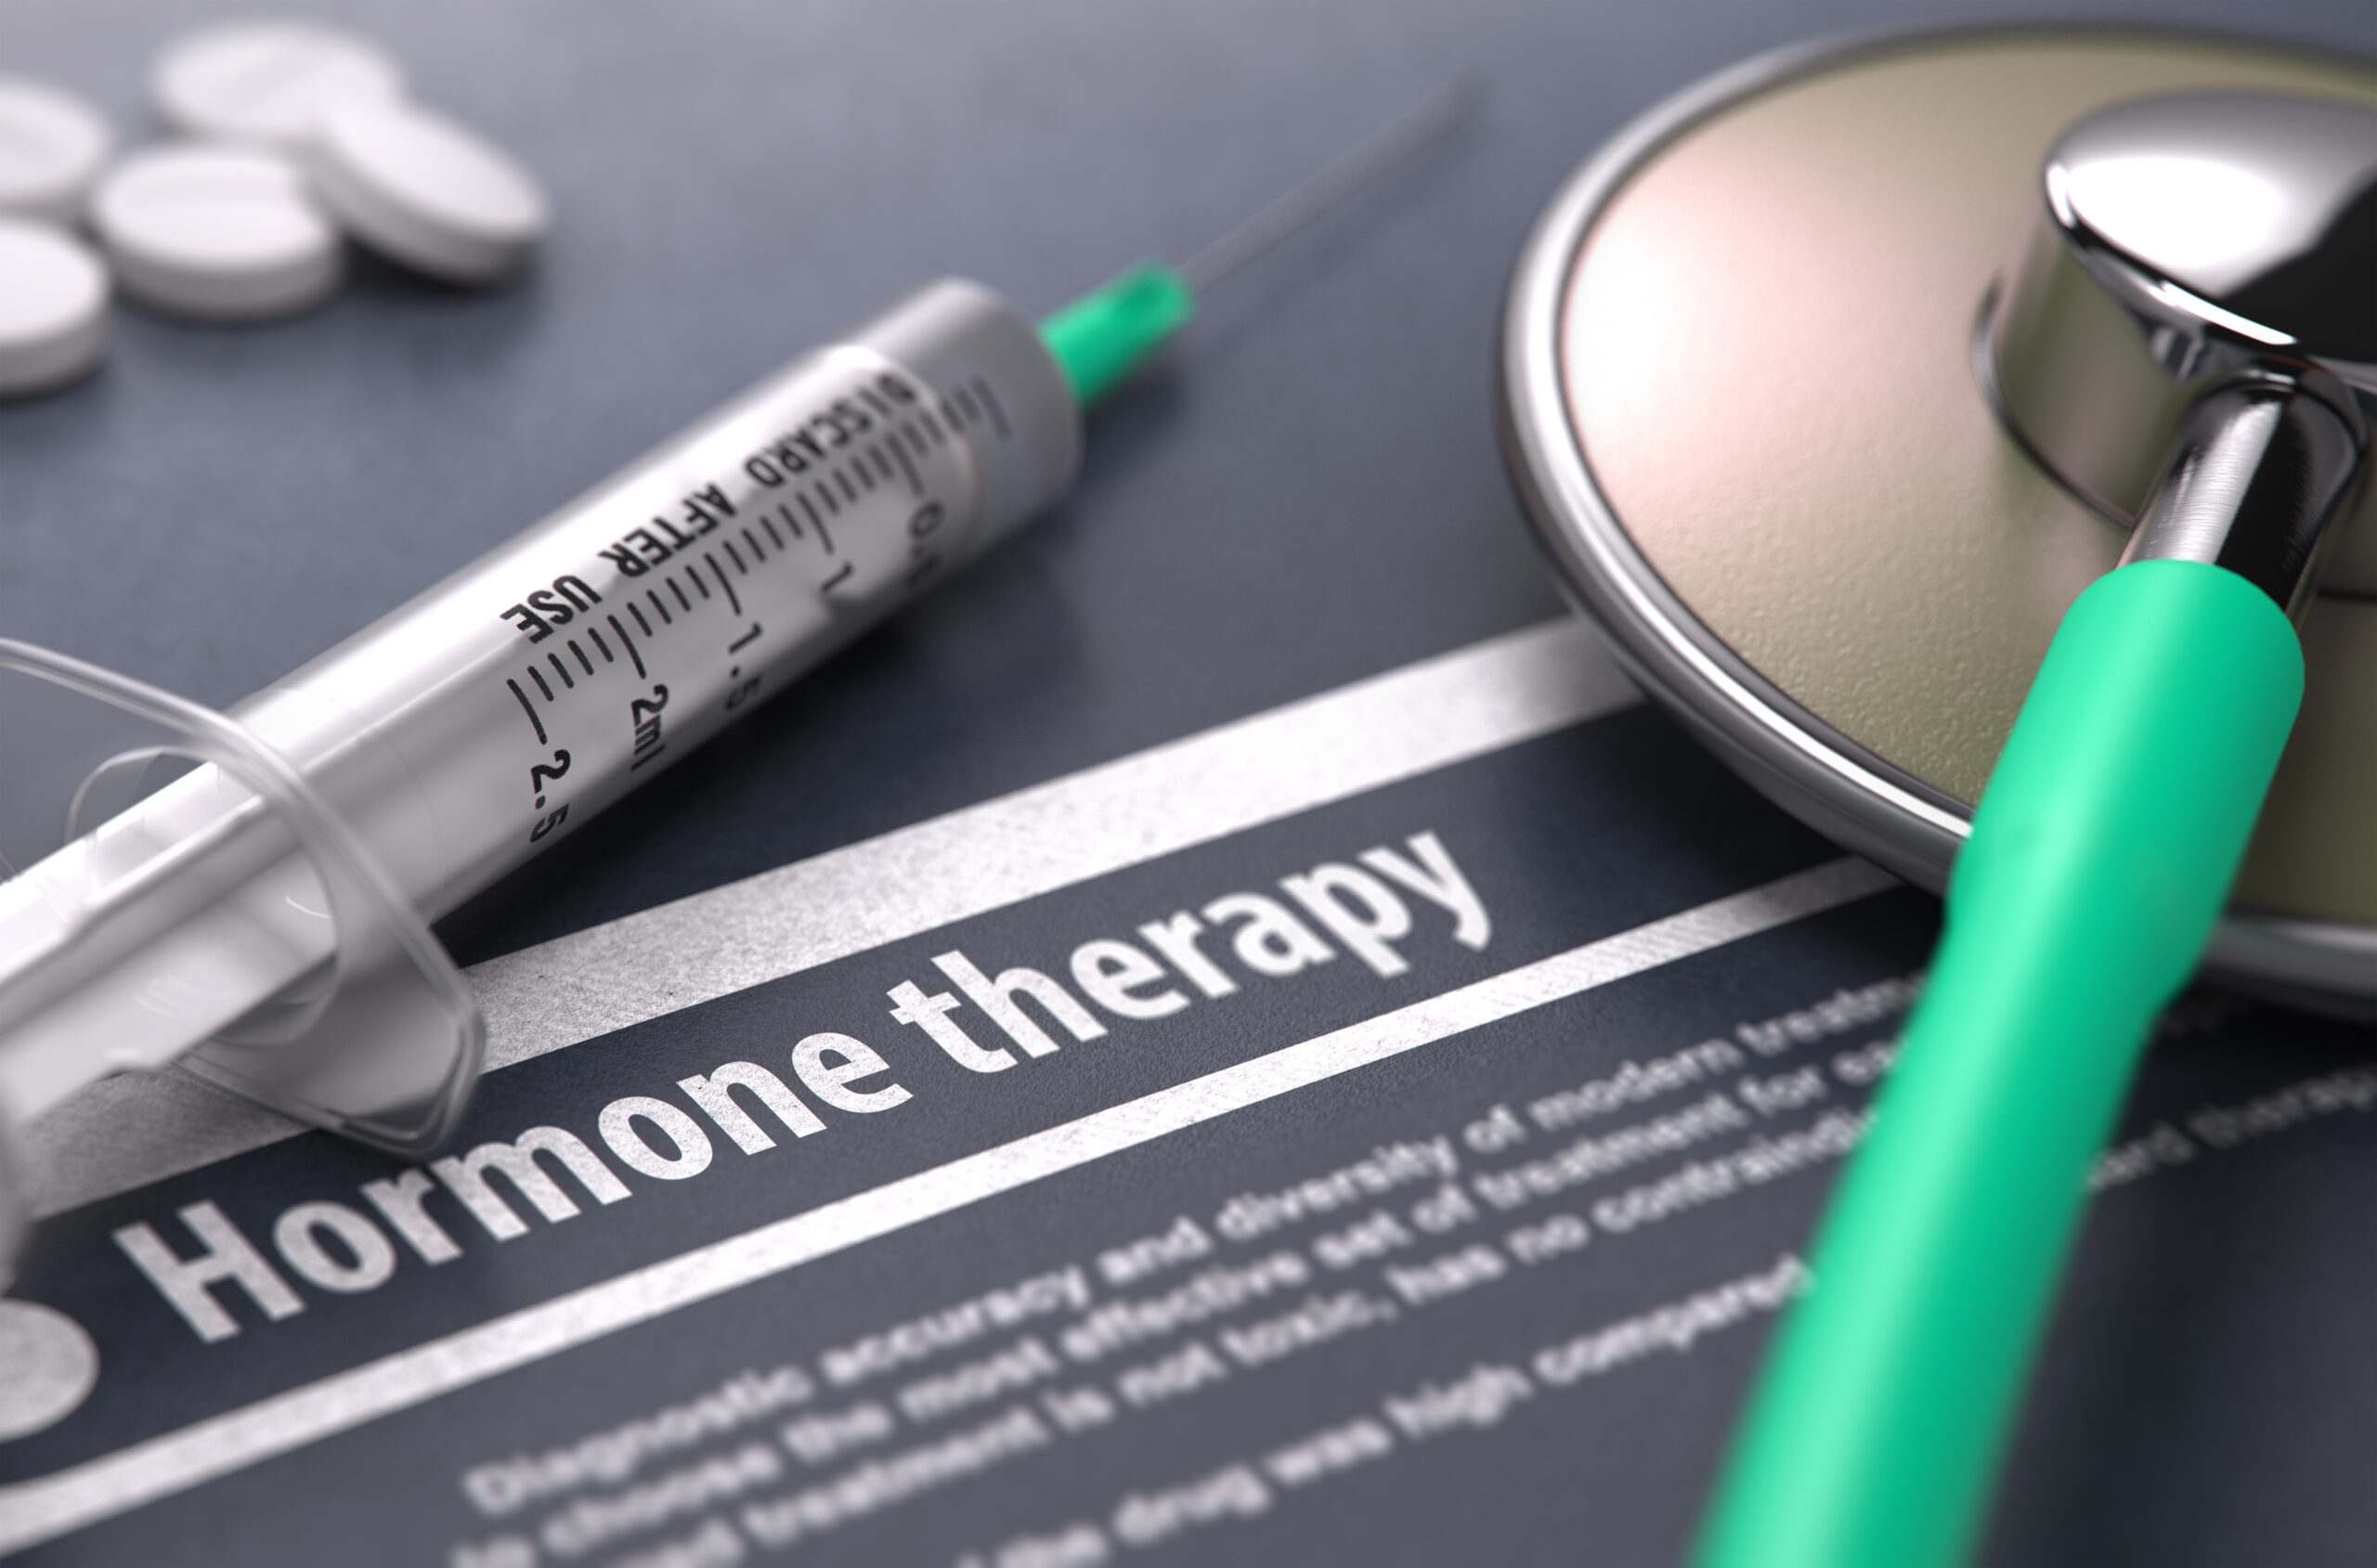 Hormone Therapy San Diego